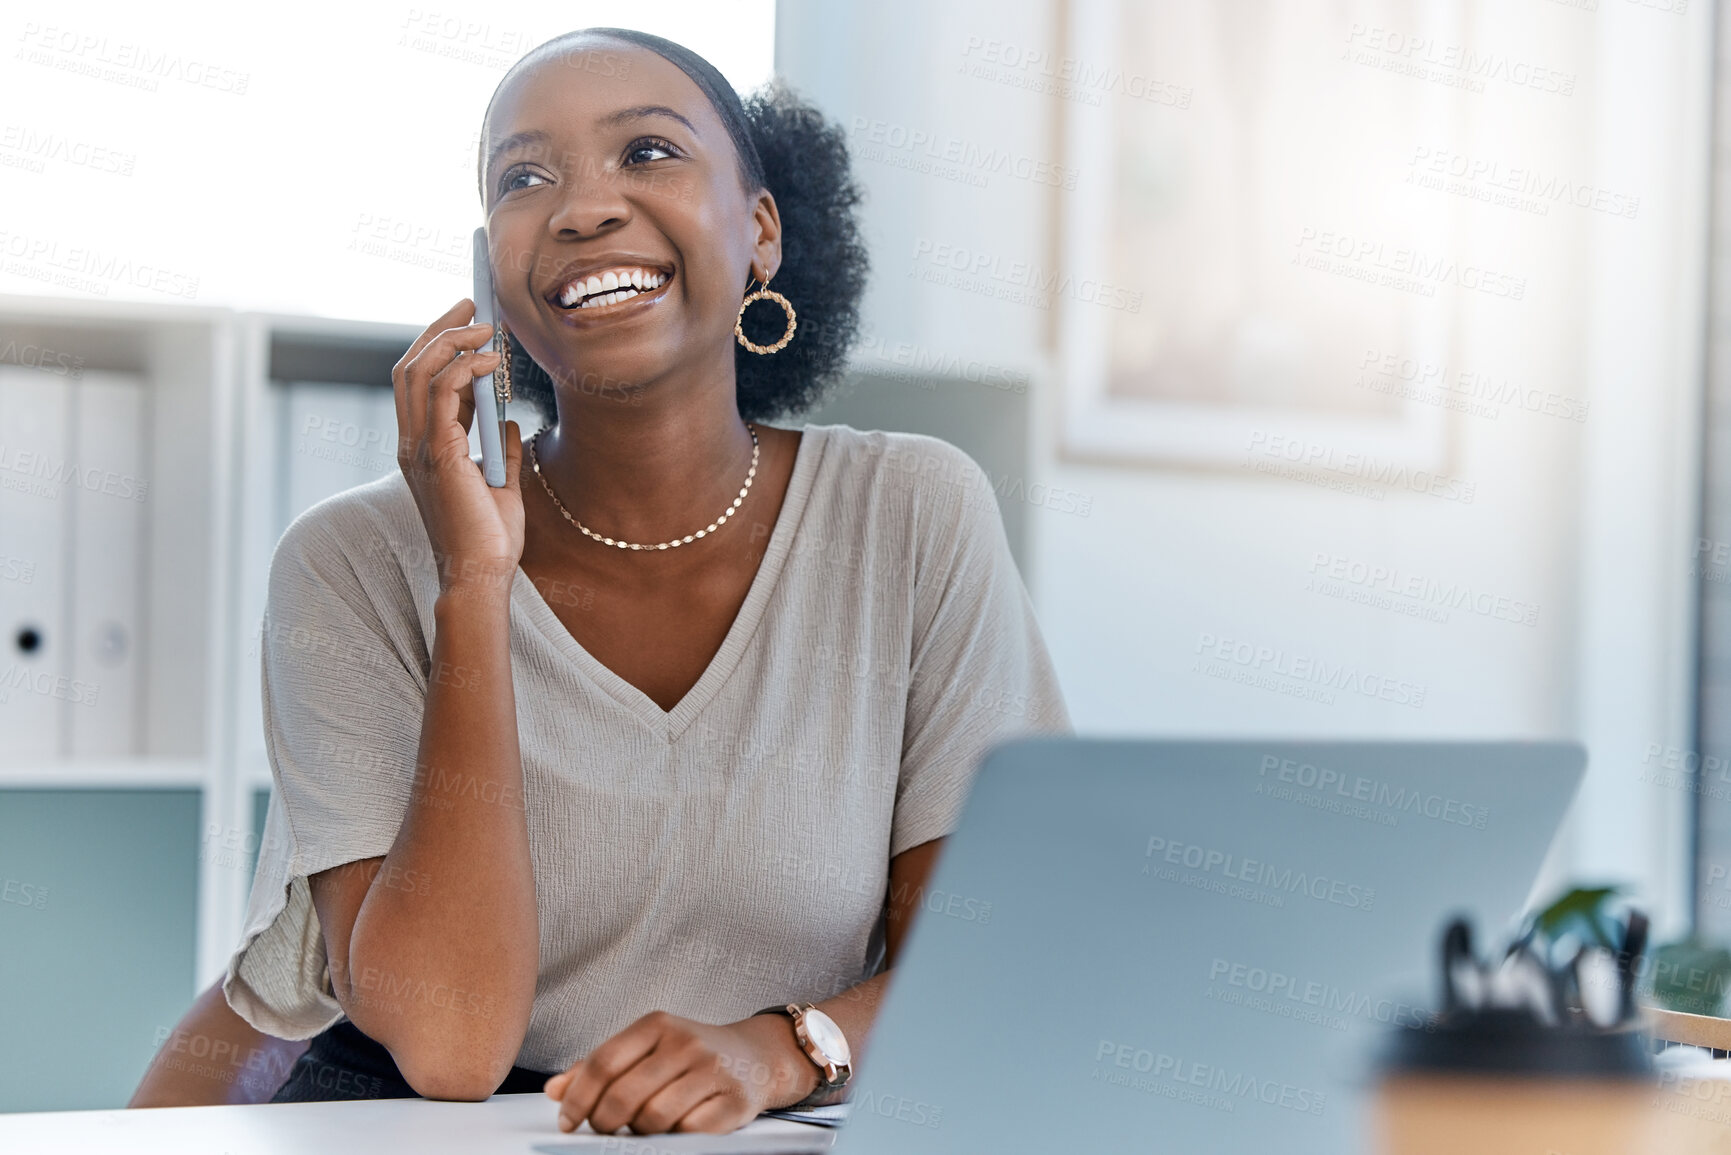 Buy stock photo Happy business woman smile talking on phone call or young entrepreneur answering cellphone while sitting in front of work laptop in an office. Female executive smiling and laughing at a funny joke